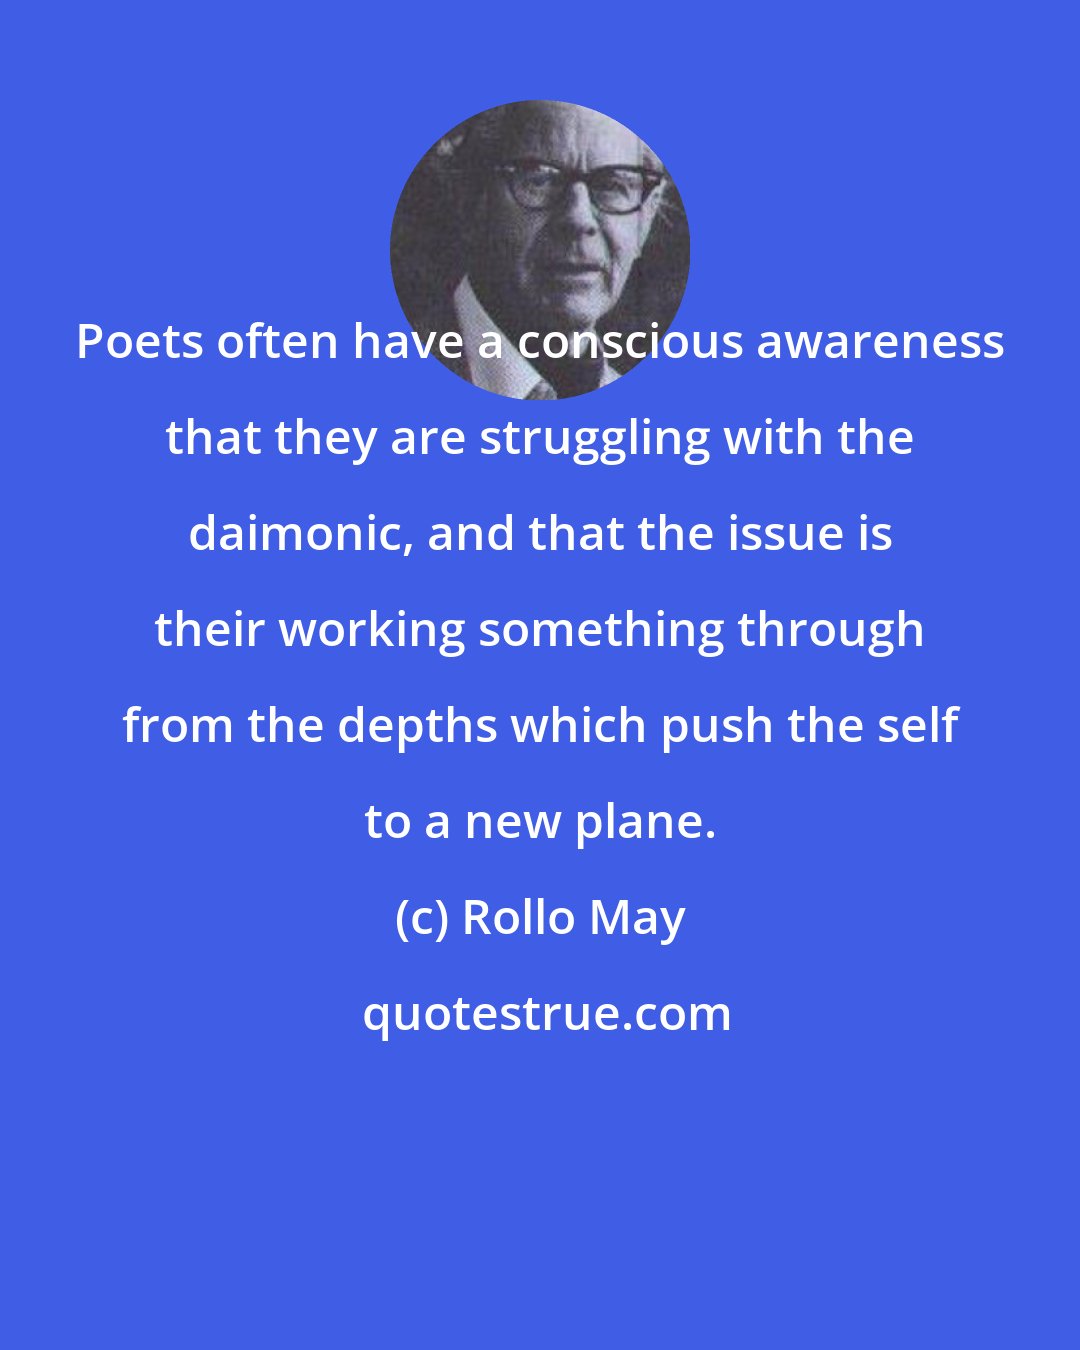 Rollo May: Poets often have a conscious awareness that they are struggling with the daimonic, and that the issue is their working something through from the depths which push the self to a new plane.